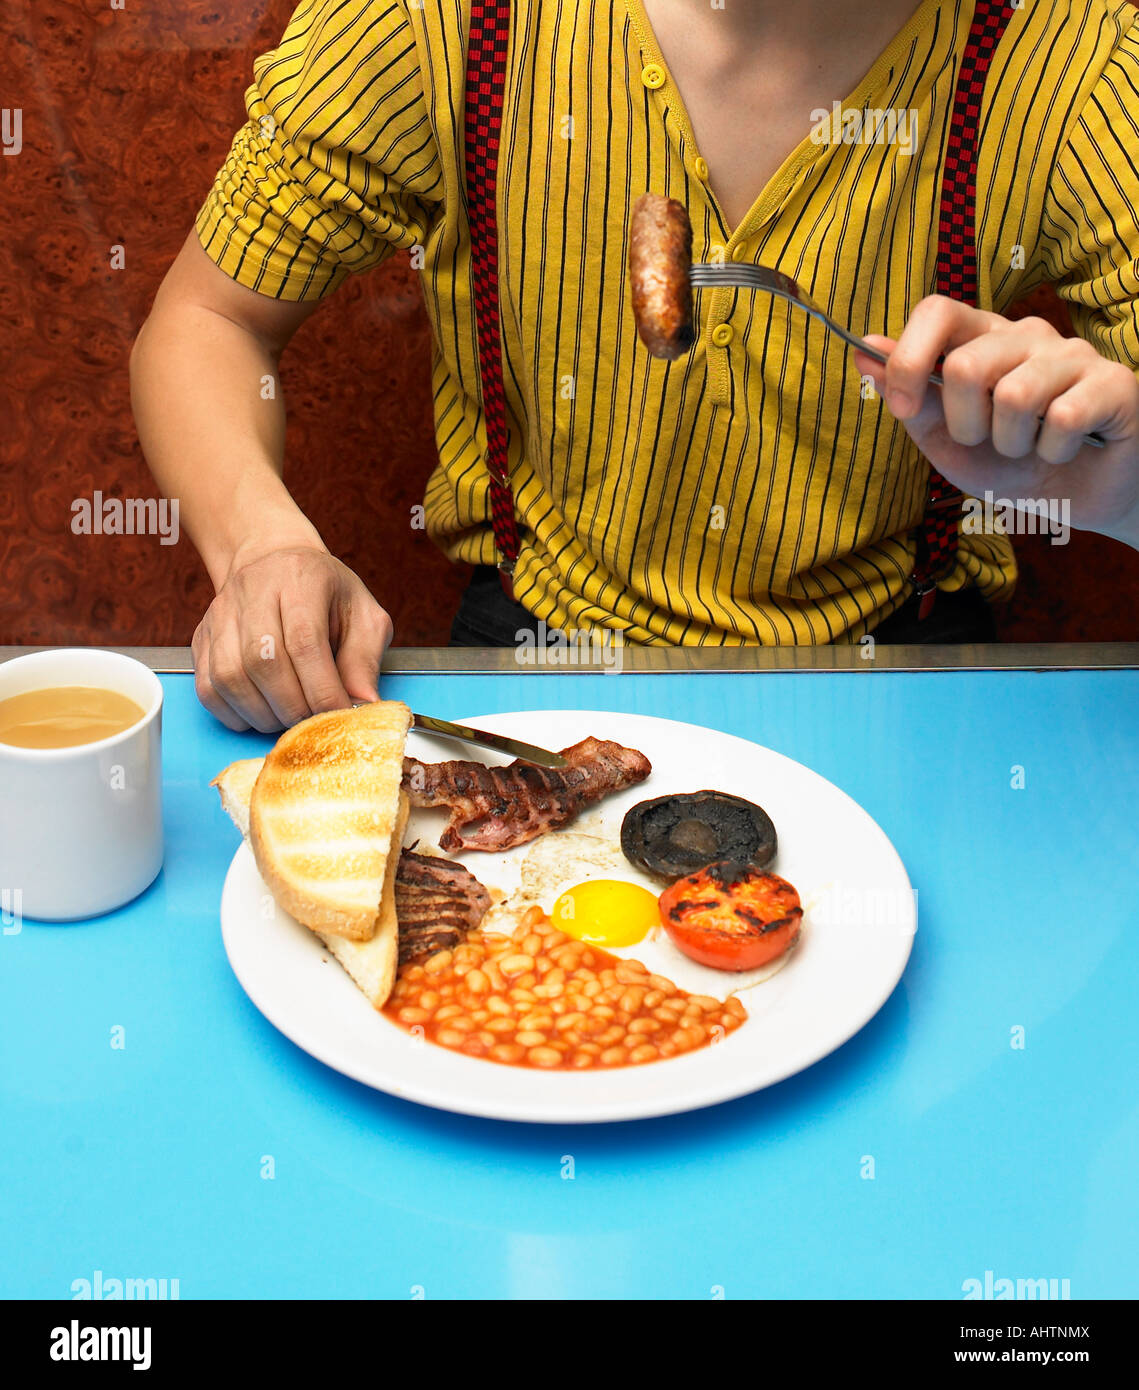 Young man eating fried breakfast in cafe, mid section Stock Photo